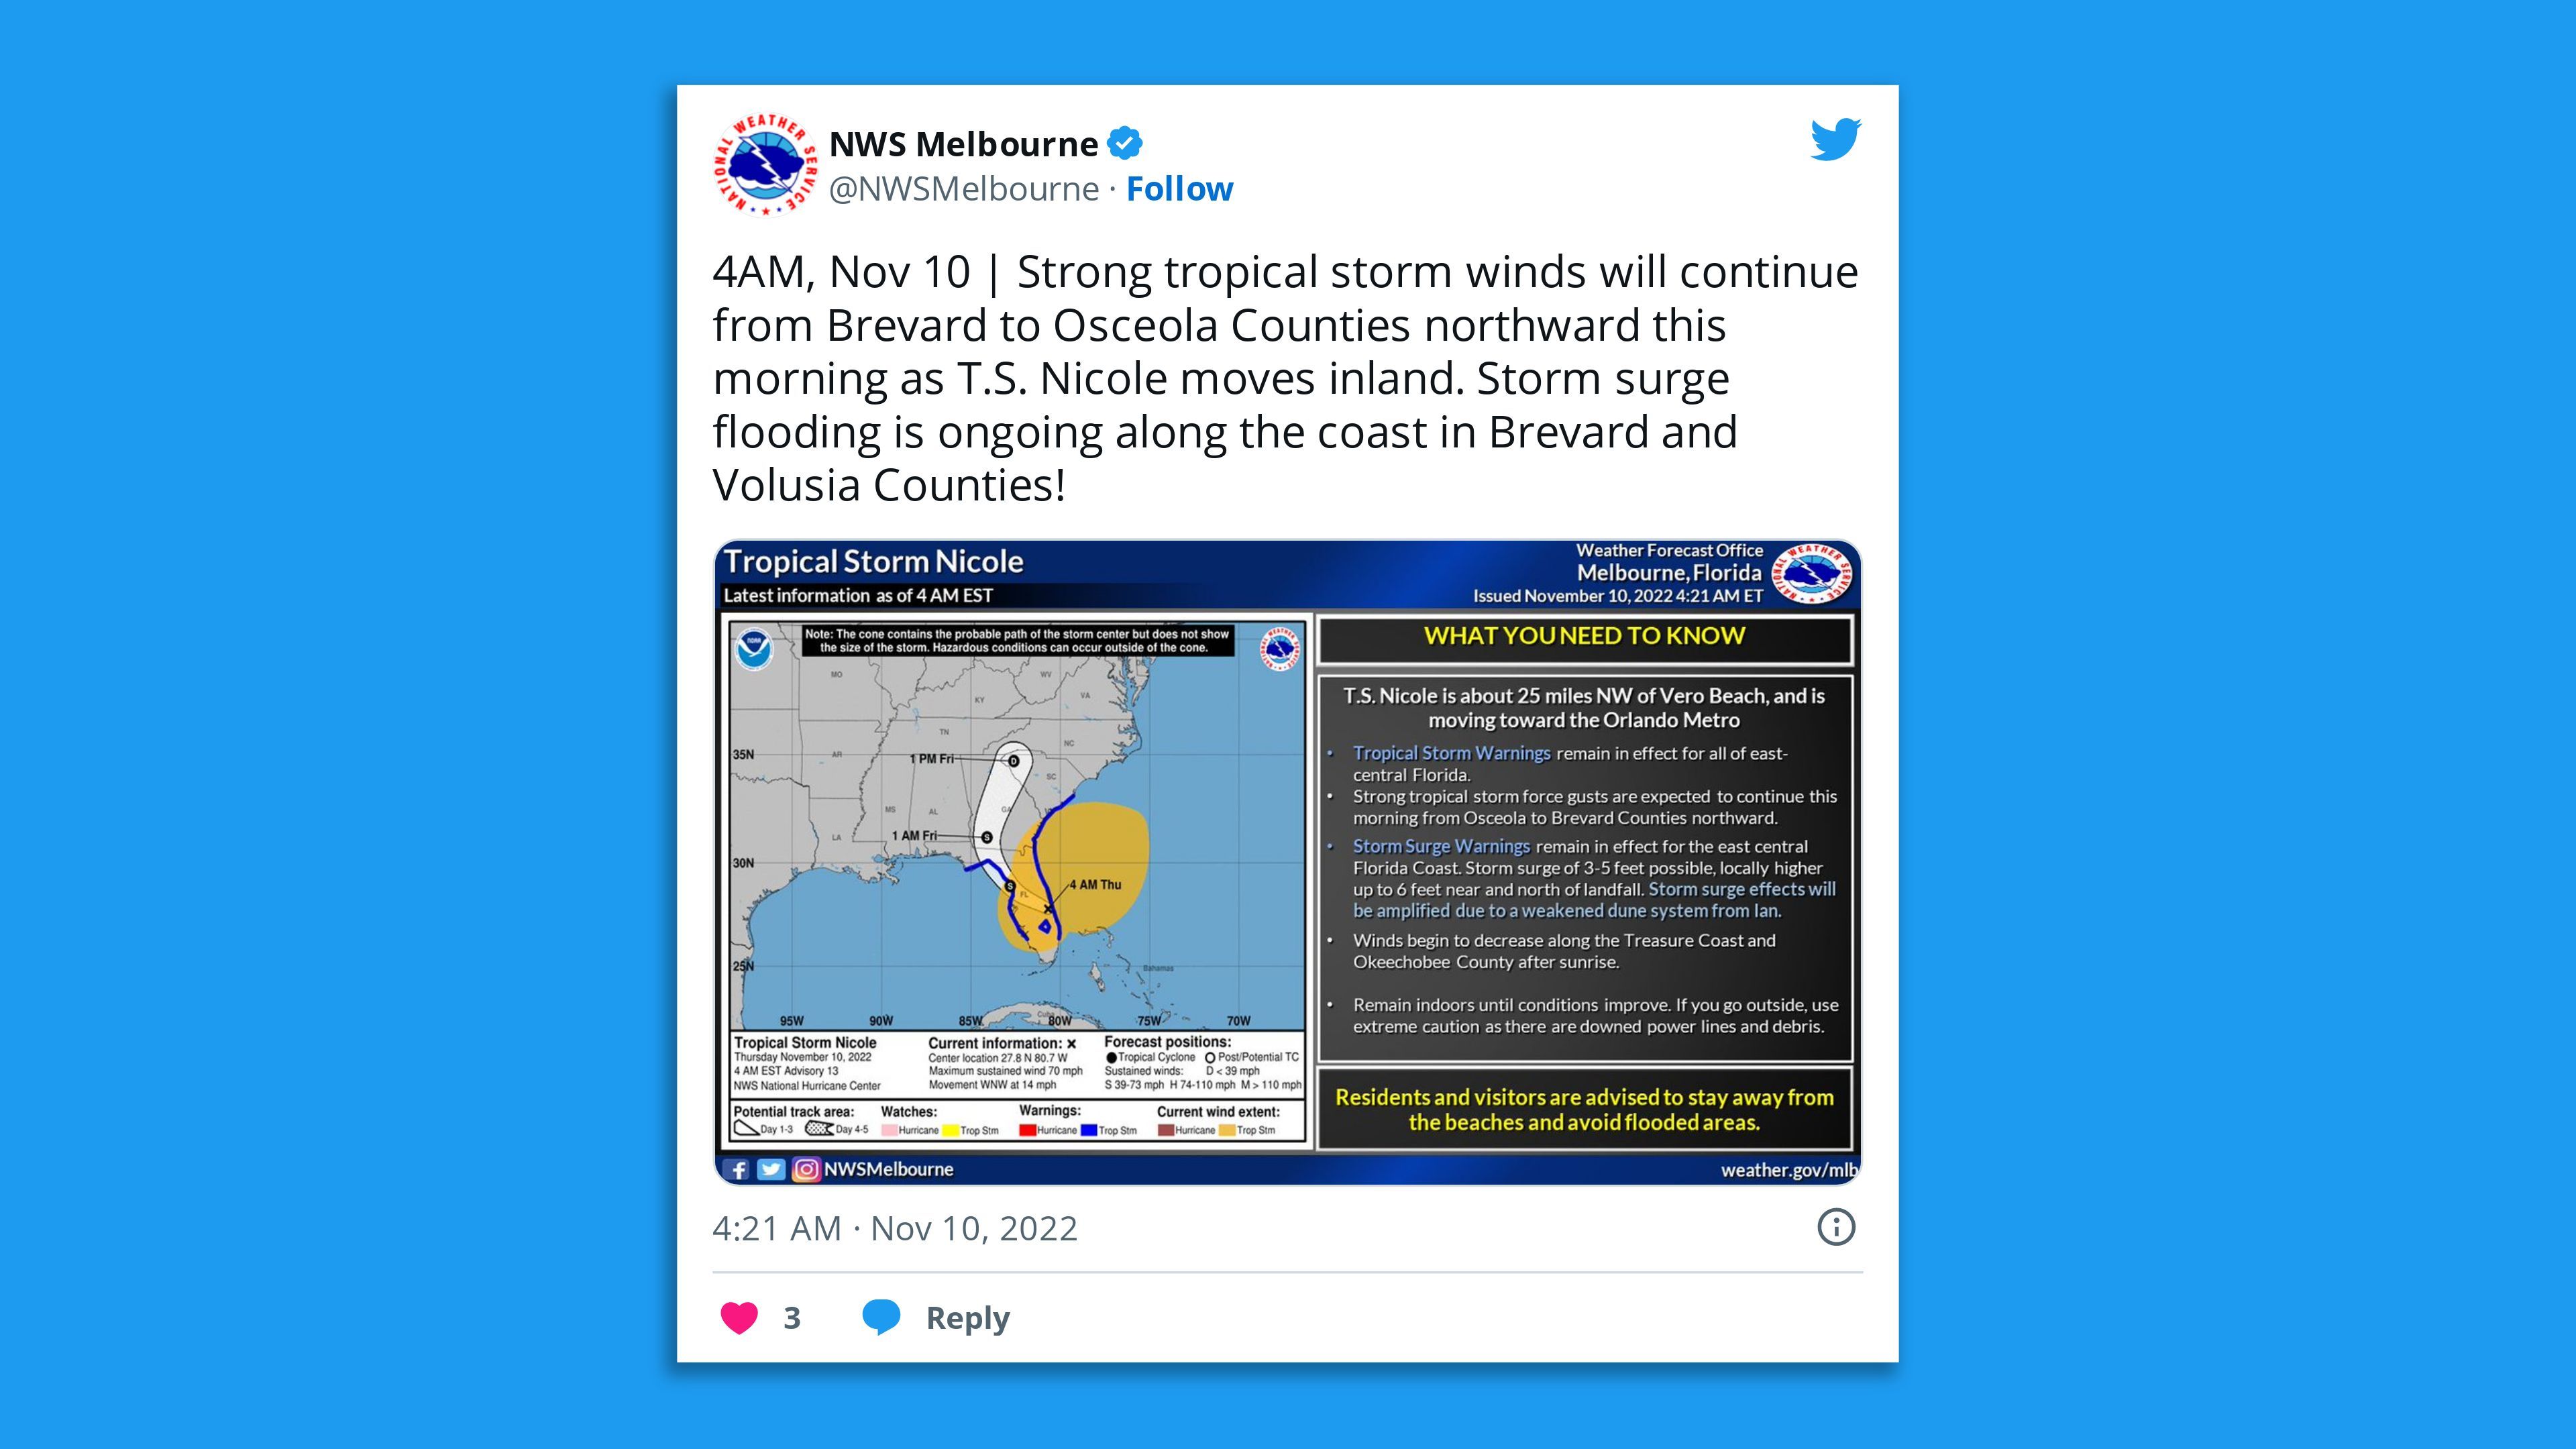 "Strong tropical storm winds will continue from Brevard to Osceola Counties northward this morning as T.S. Nicole moves inland," National Weather Service warns in a tweet.